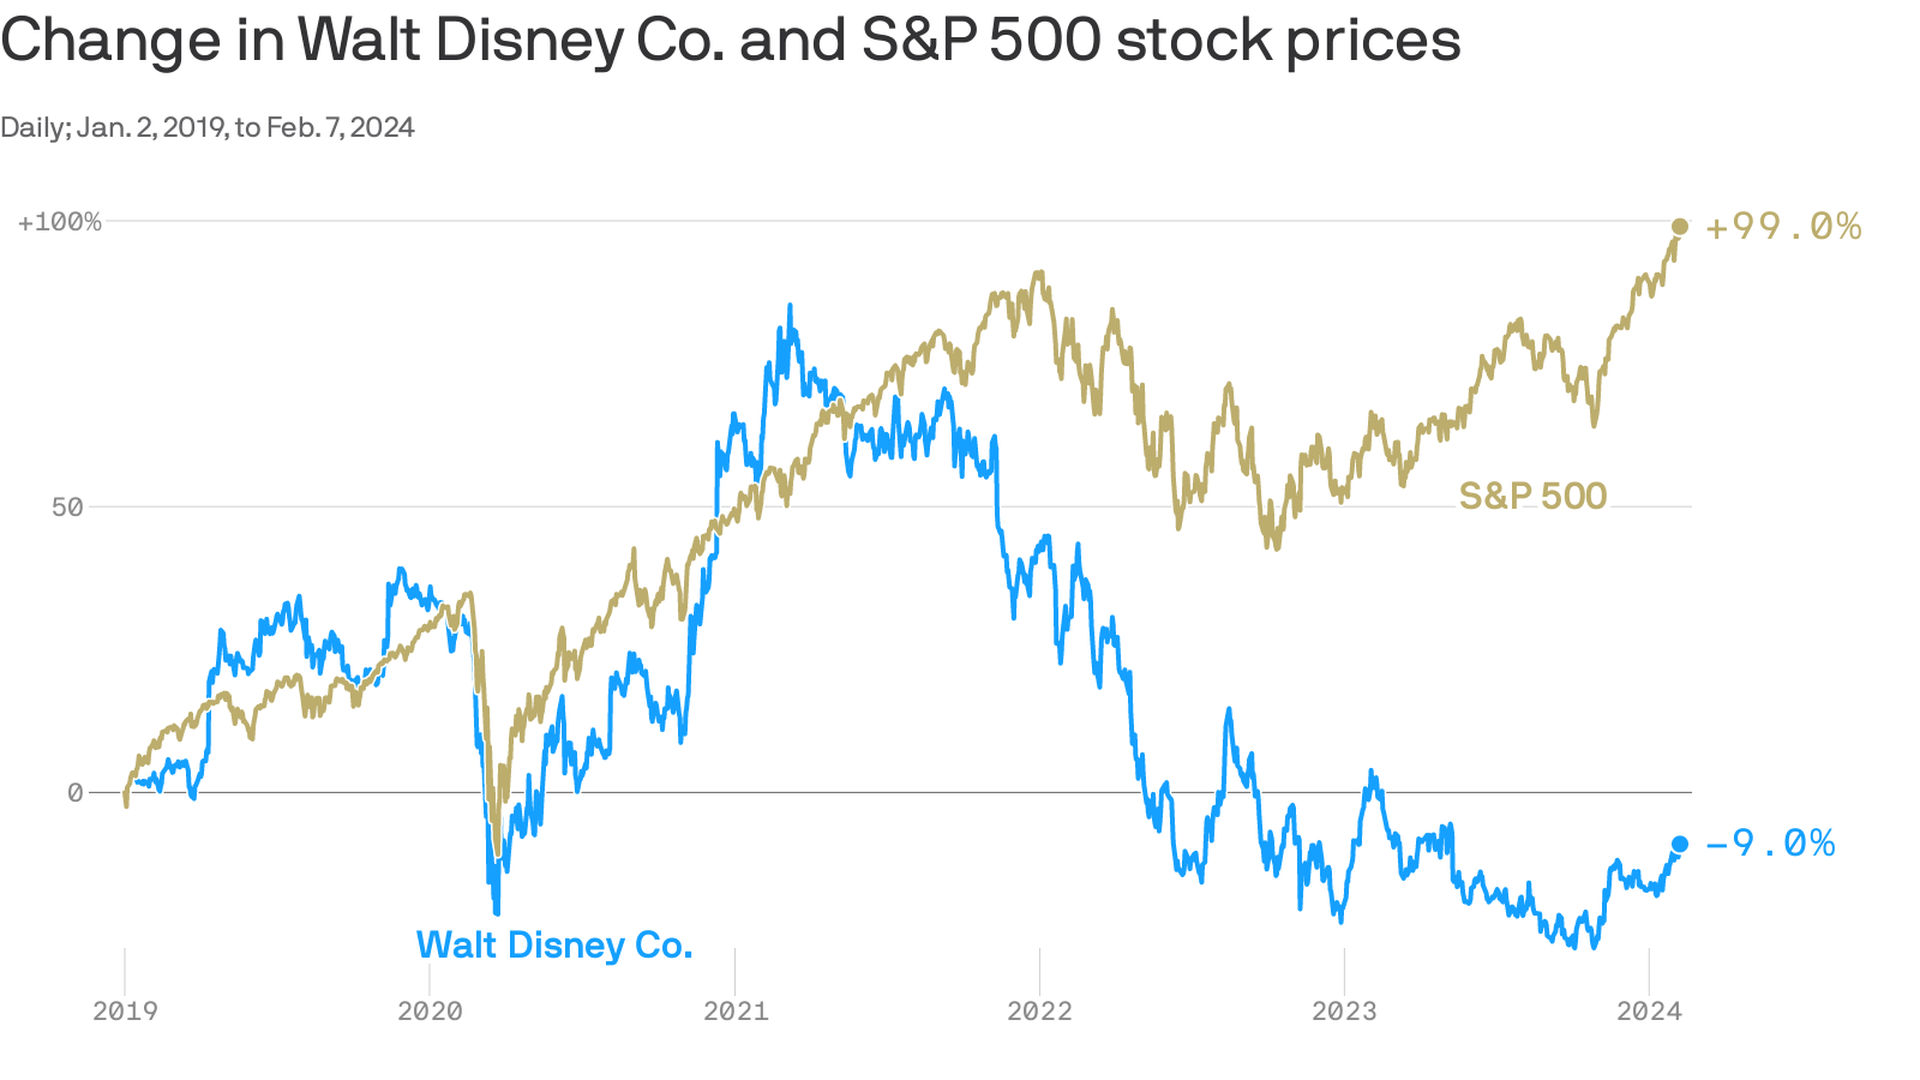 Five-year comparison of Walt Disney Co. and S&P 500 stock prices from January 2019 to February 2024, showing a significant increase in the S&P 500 to +99% and a slight decrease in Walt Disney Co. stocks to -9%.